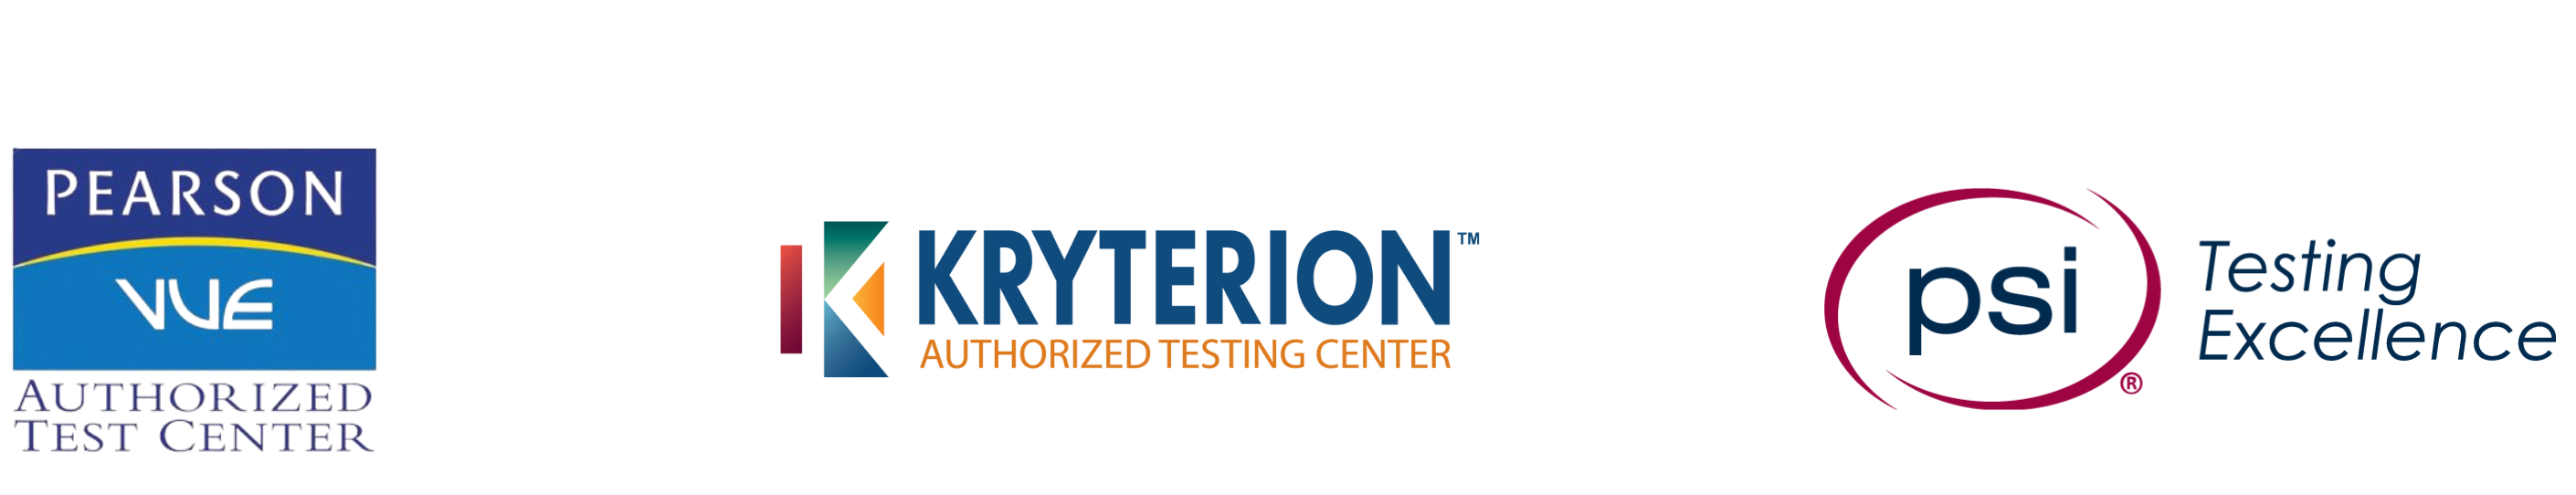 Tech Act Authorized Testing Center